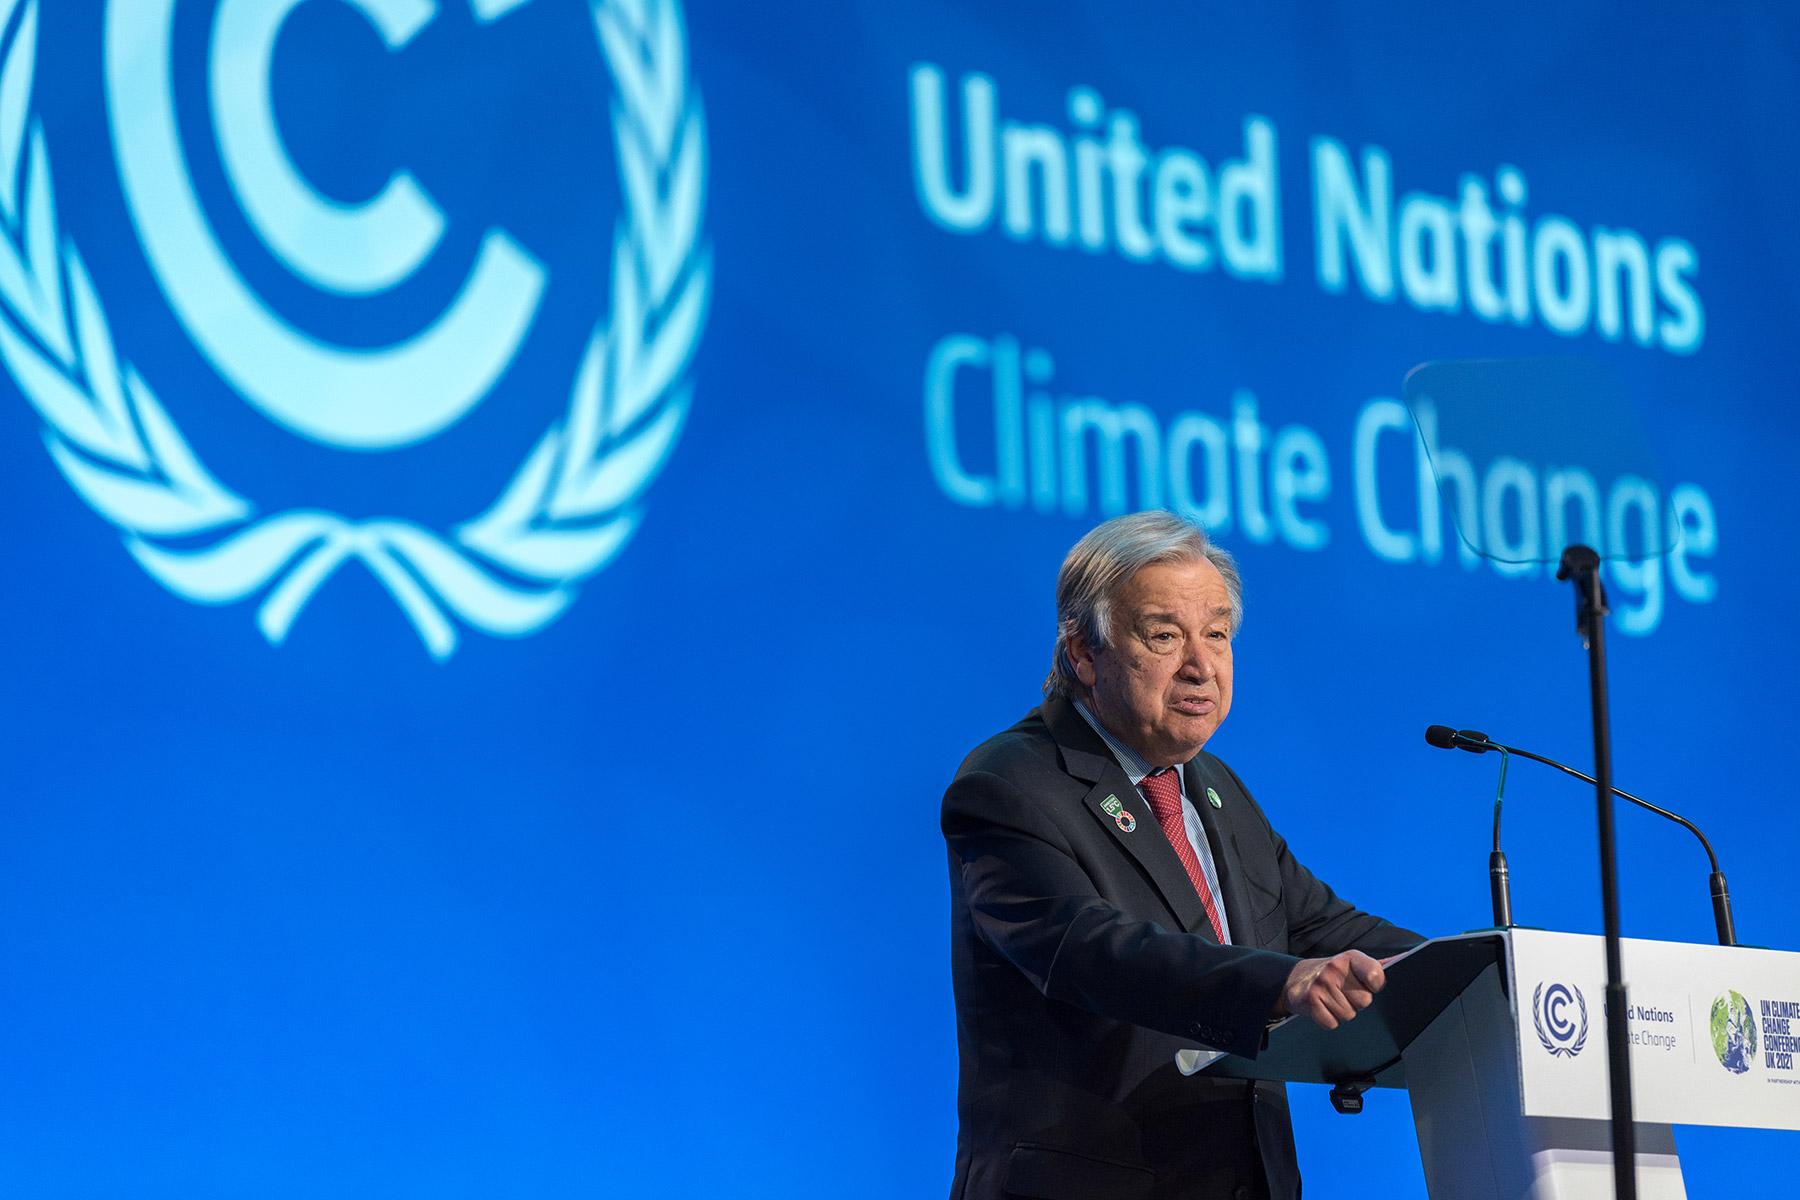 United Nations Secretary-General AntÃ³nio Guterres addresses COP26 delegates during a UN High-Level Event for Global Climate Action â âRacing to a Better Worldâ â at COP26. Photo: LWF/Albin Hillert